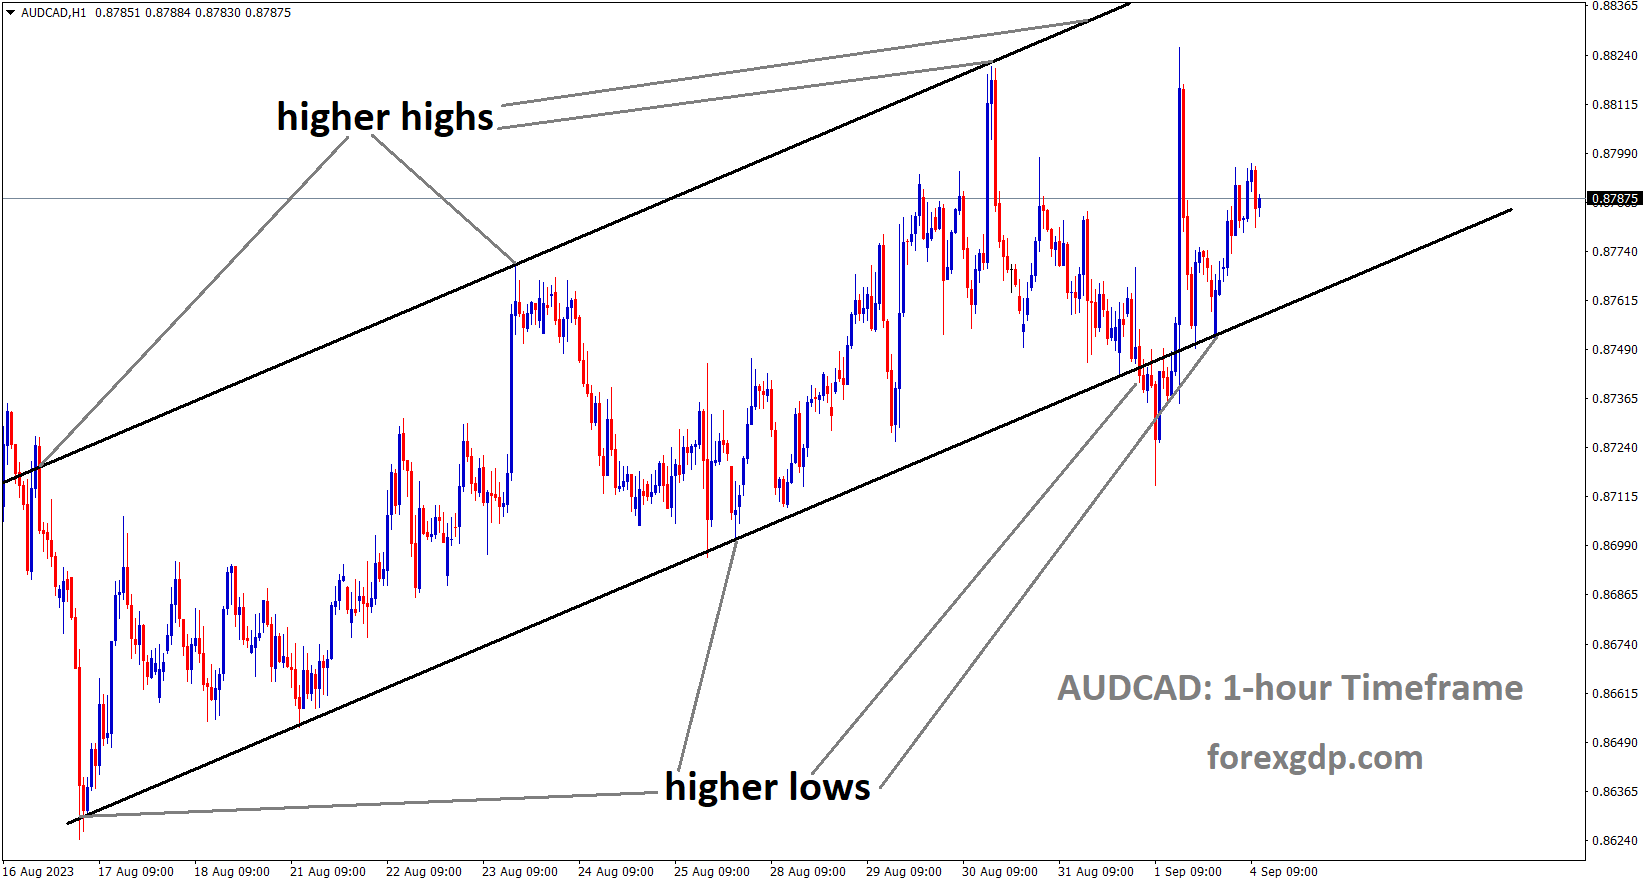 AUDCAD is moving in an Ascending channel and the market has rebounded from the higher low area of the channel